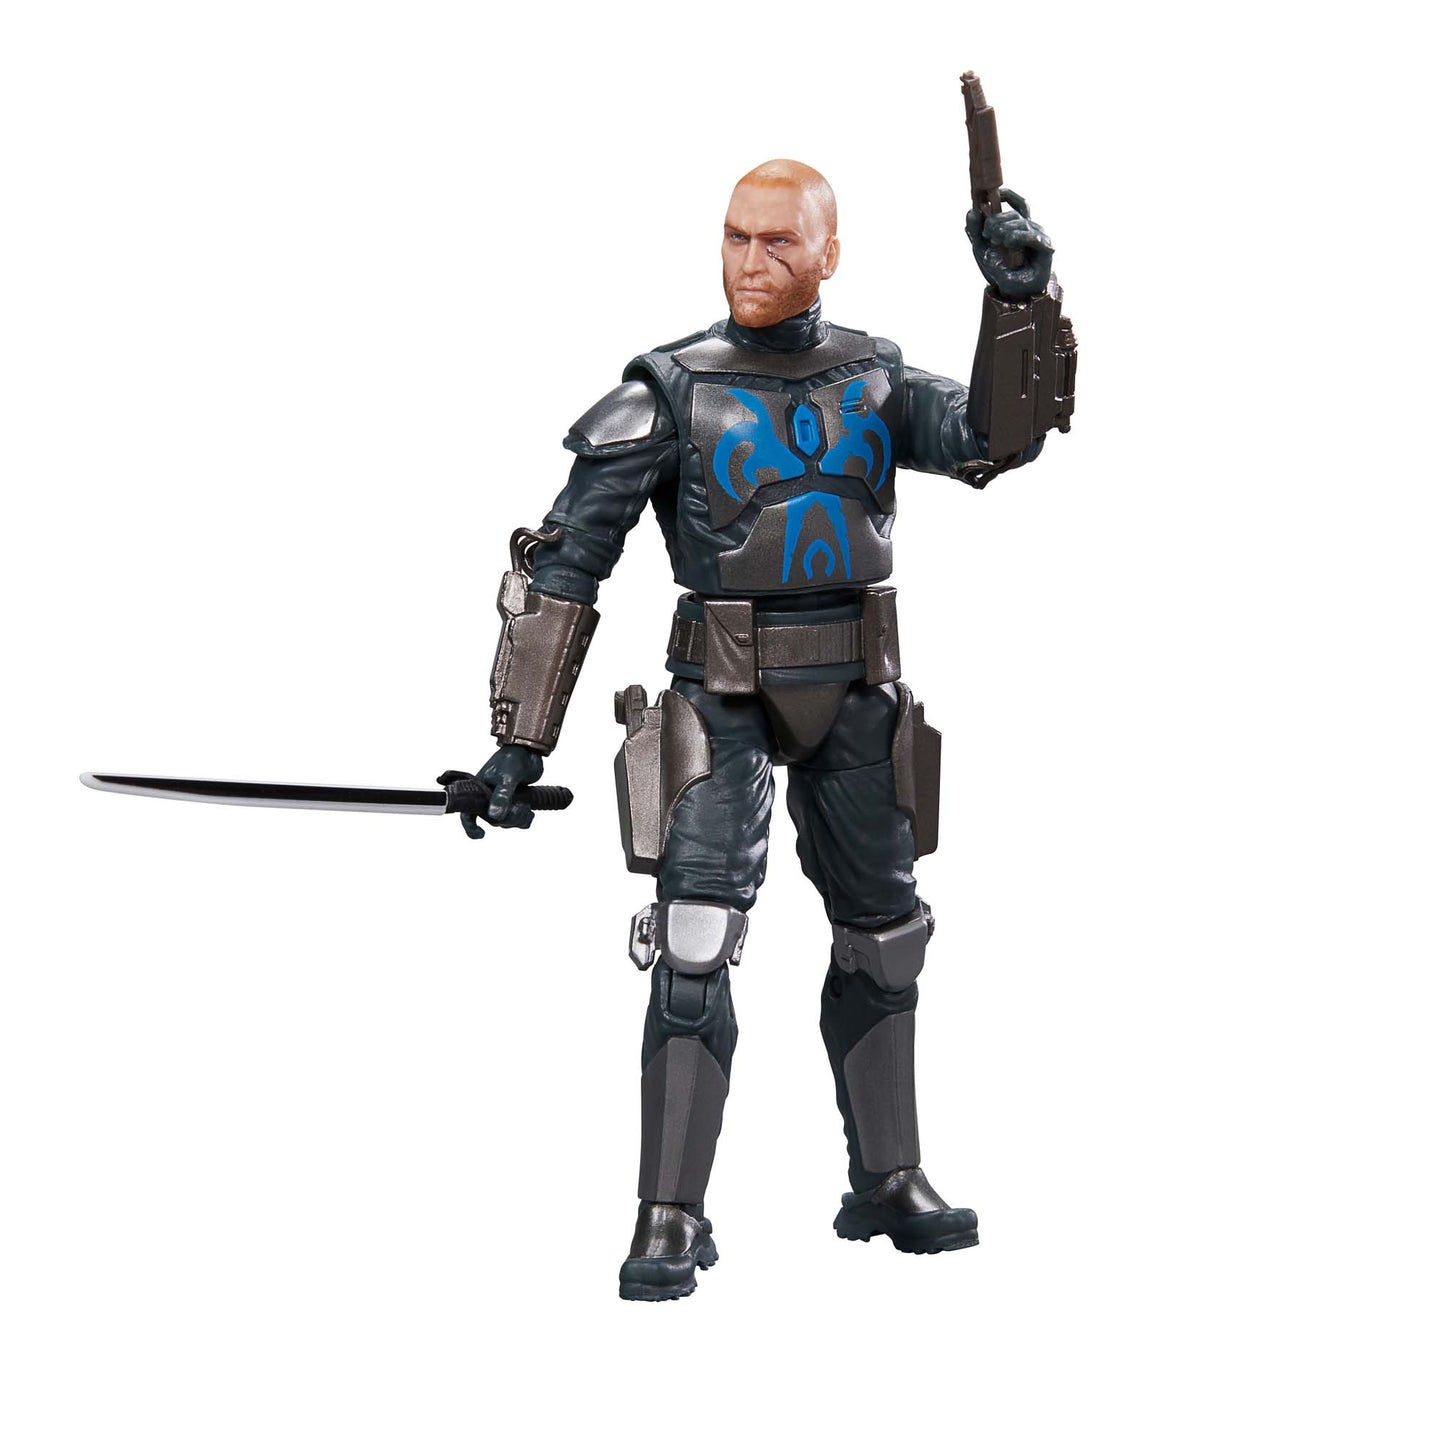 Star Wars The Black Series Pre Vizsla Action Figure Toy with gun and sword - Heretoserveyou